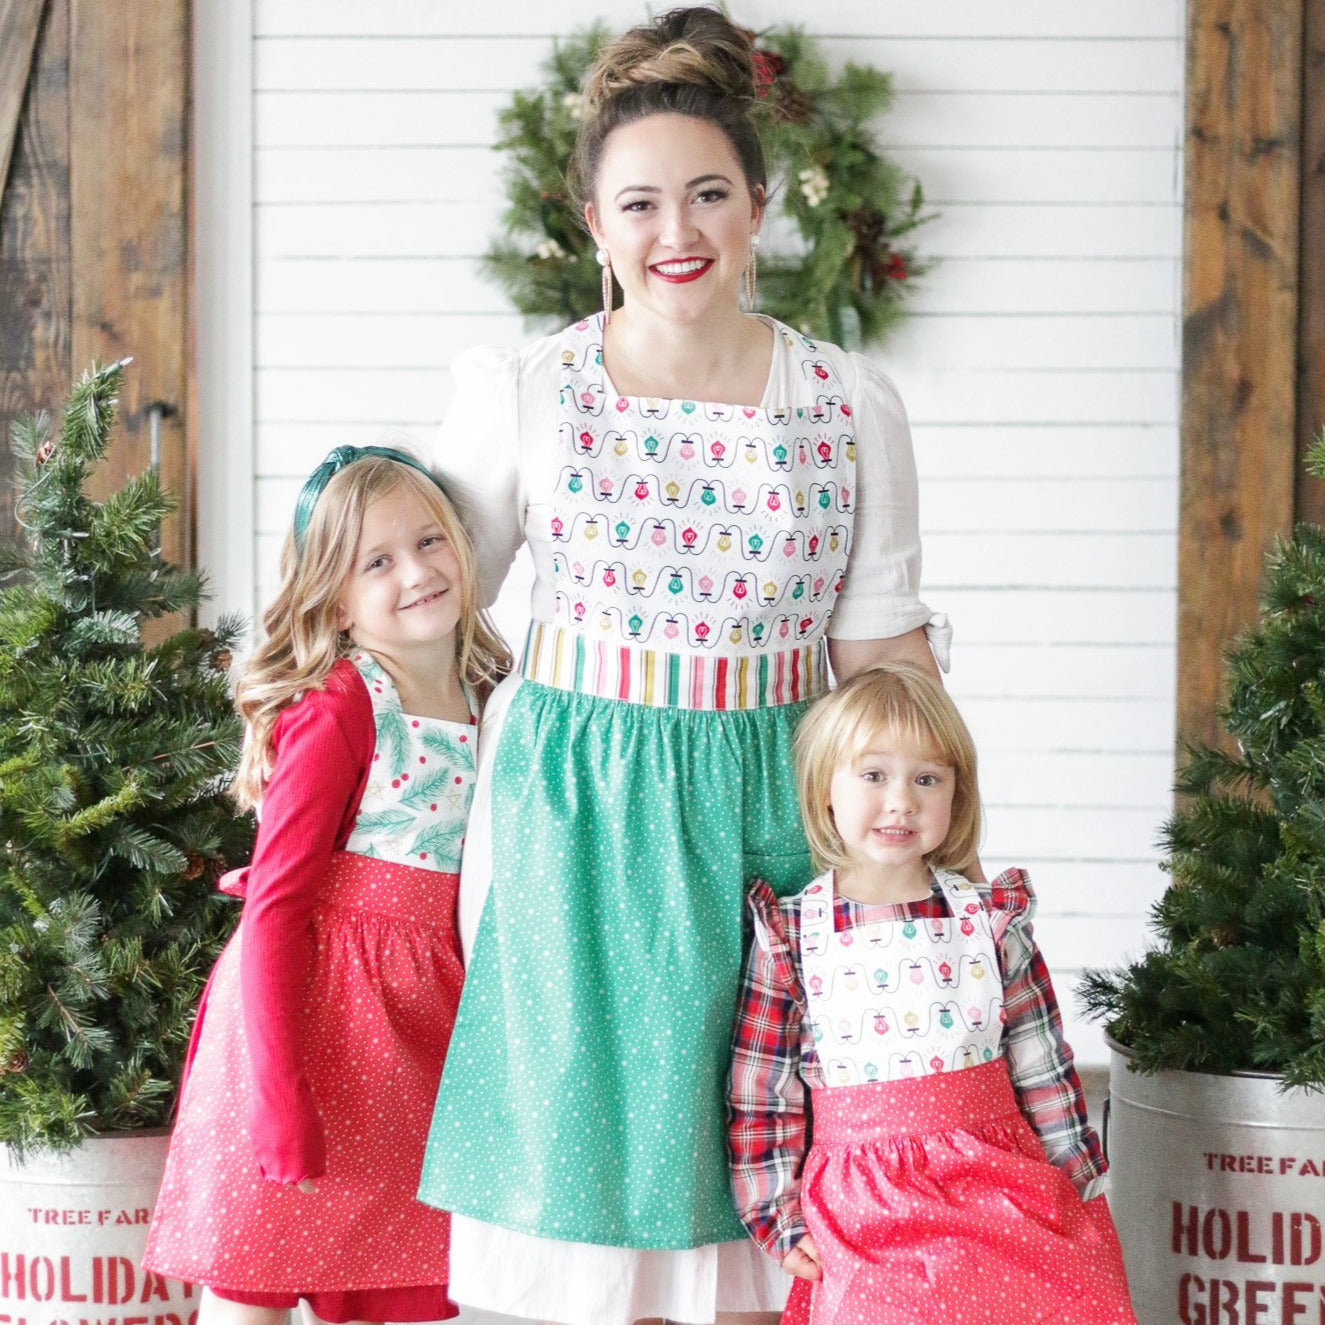 Mommy and Me Apron Sewing Pattern